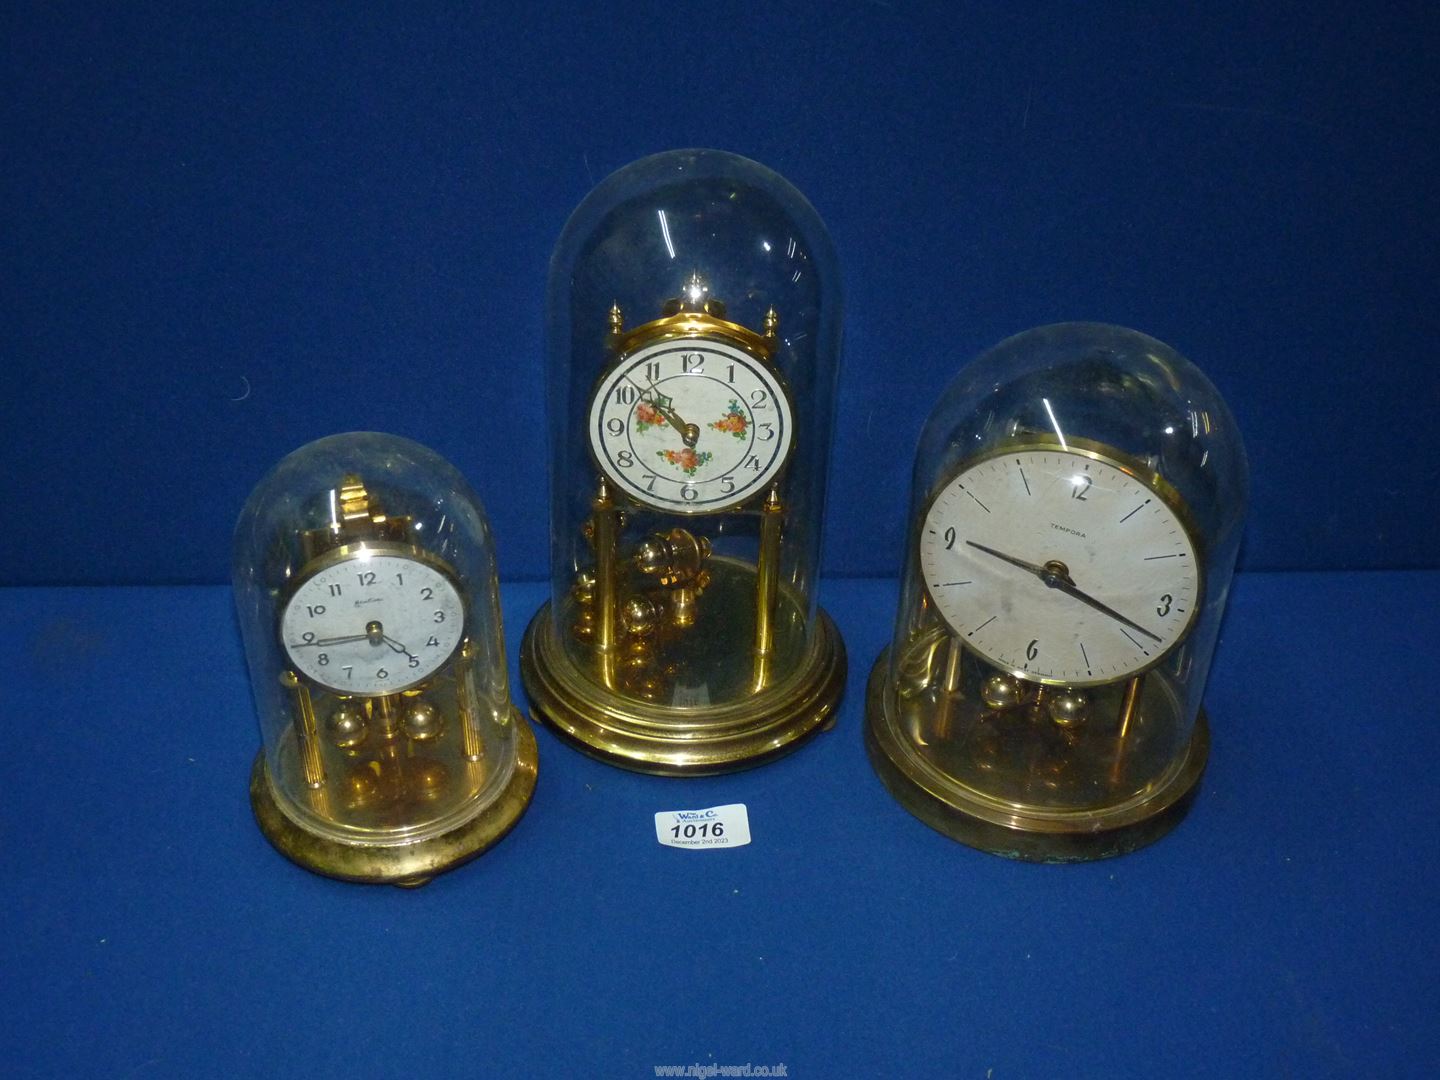 Three anniversary clocks including Bentime and Tempora, one with glass dome, two with plastic.